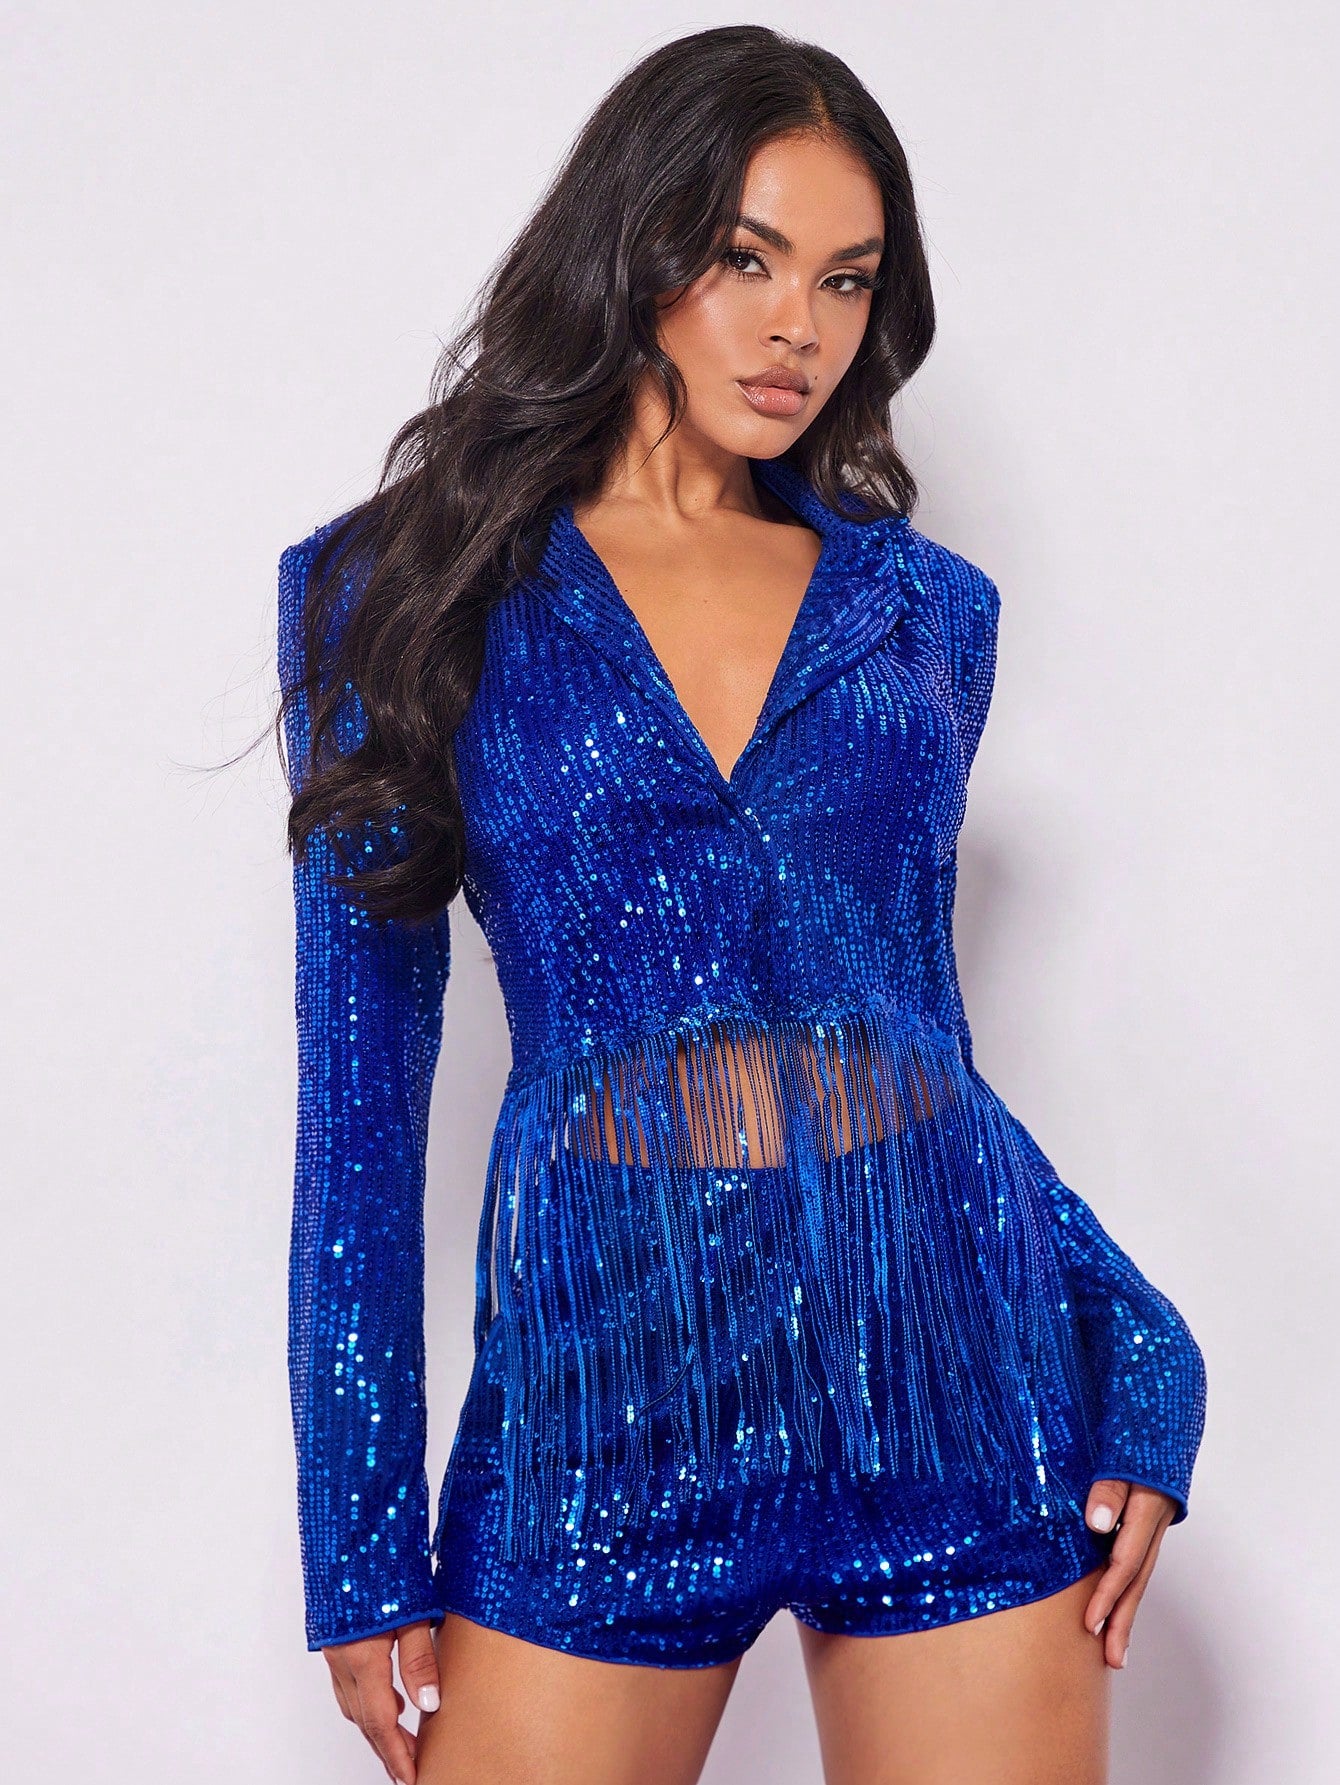 Blue sequin jacket worn by a model on a white background for product picture